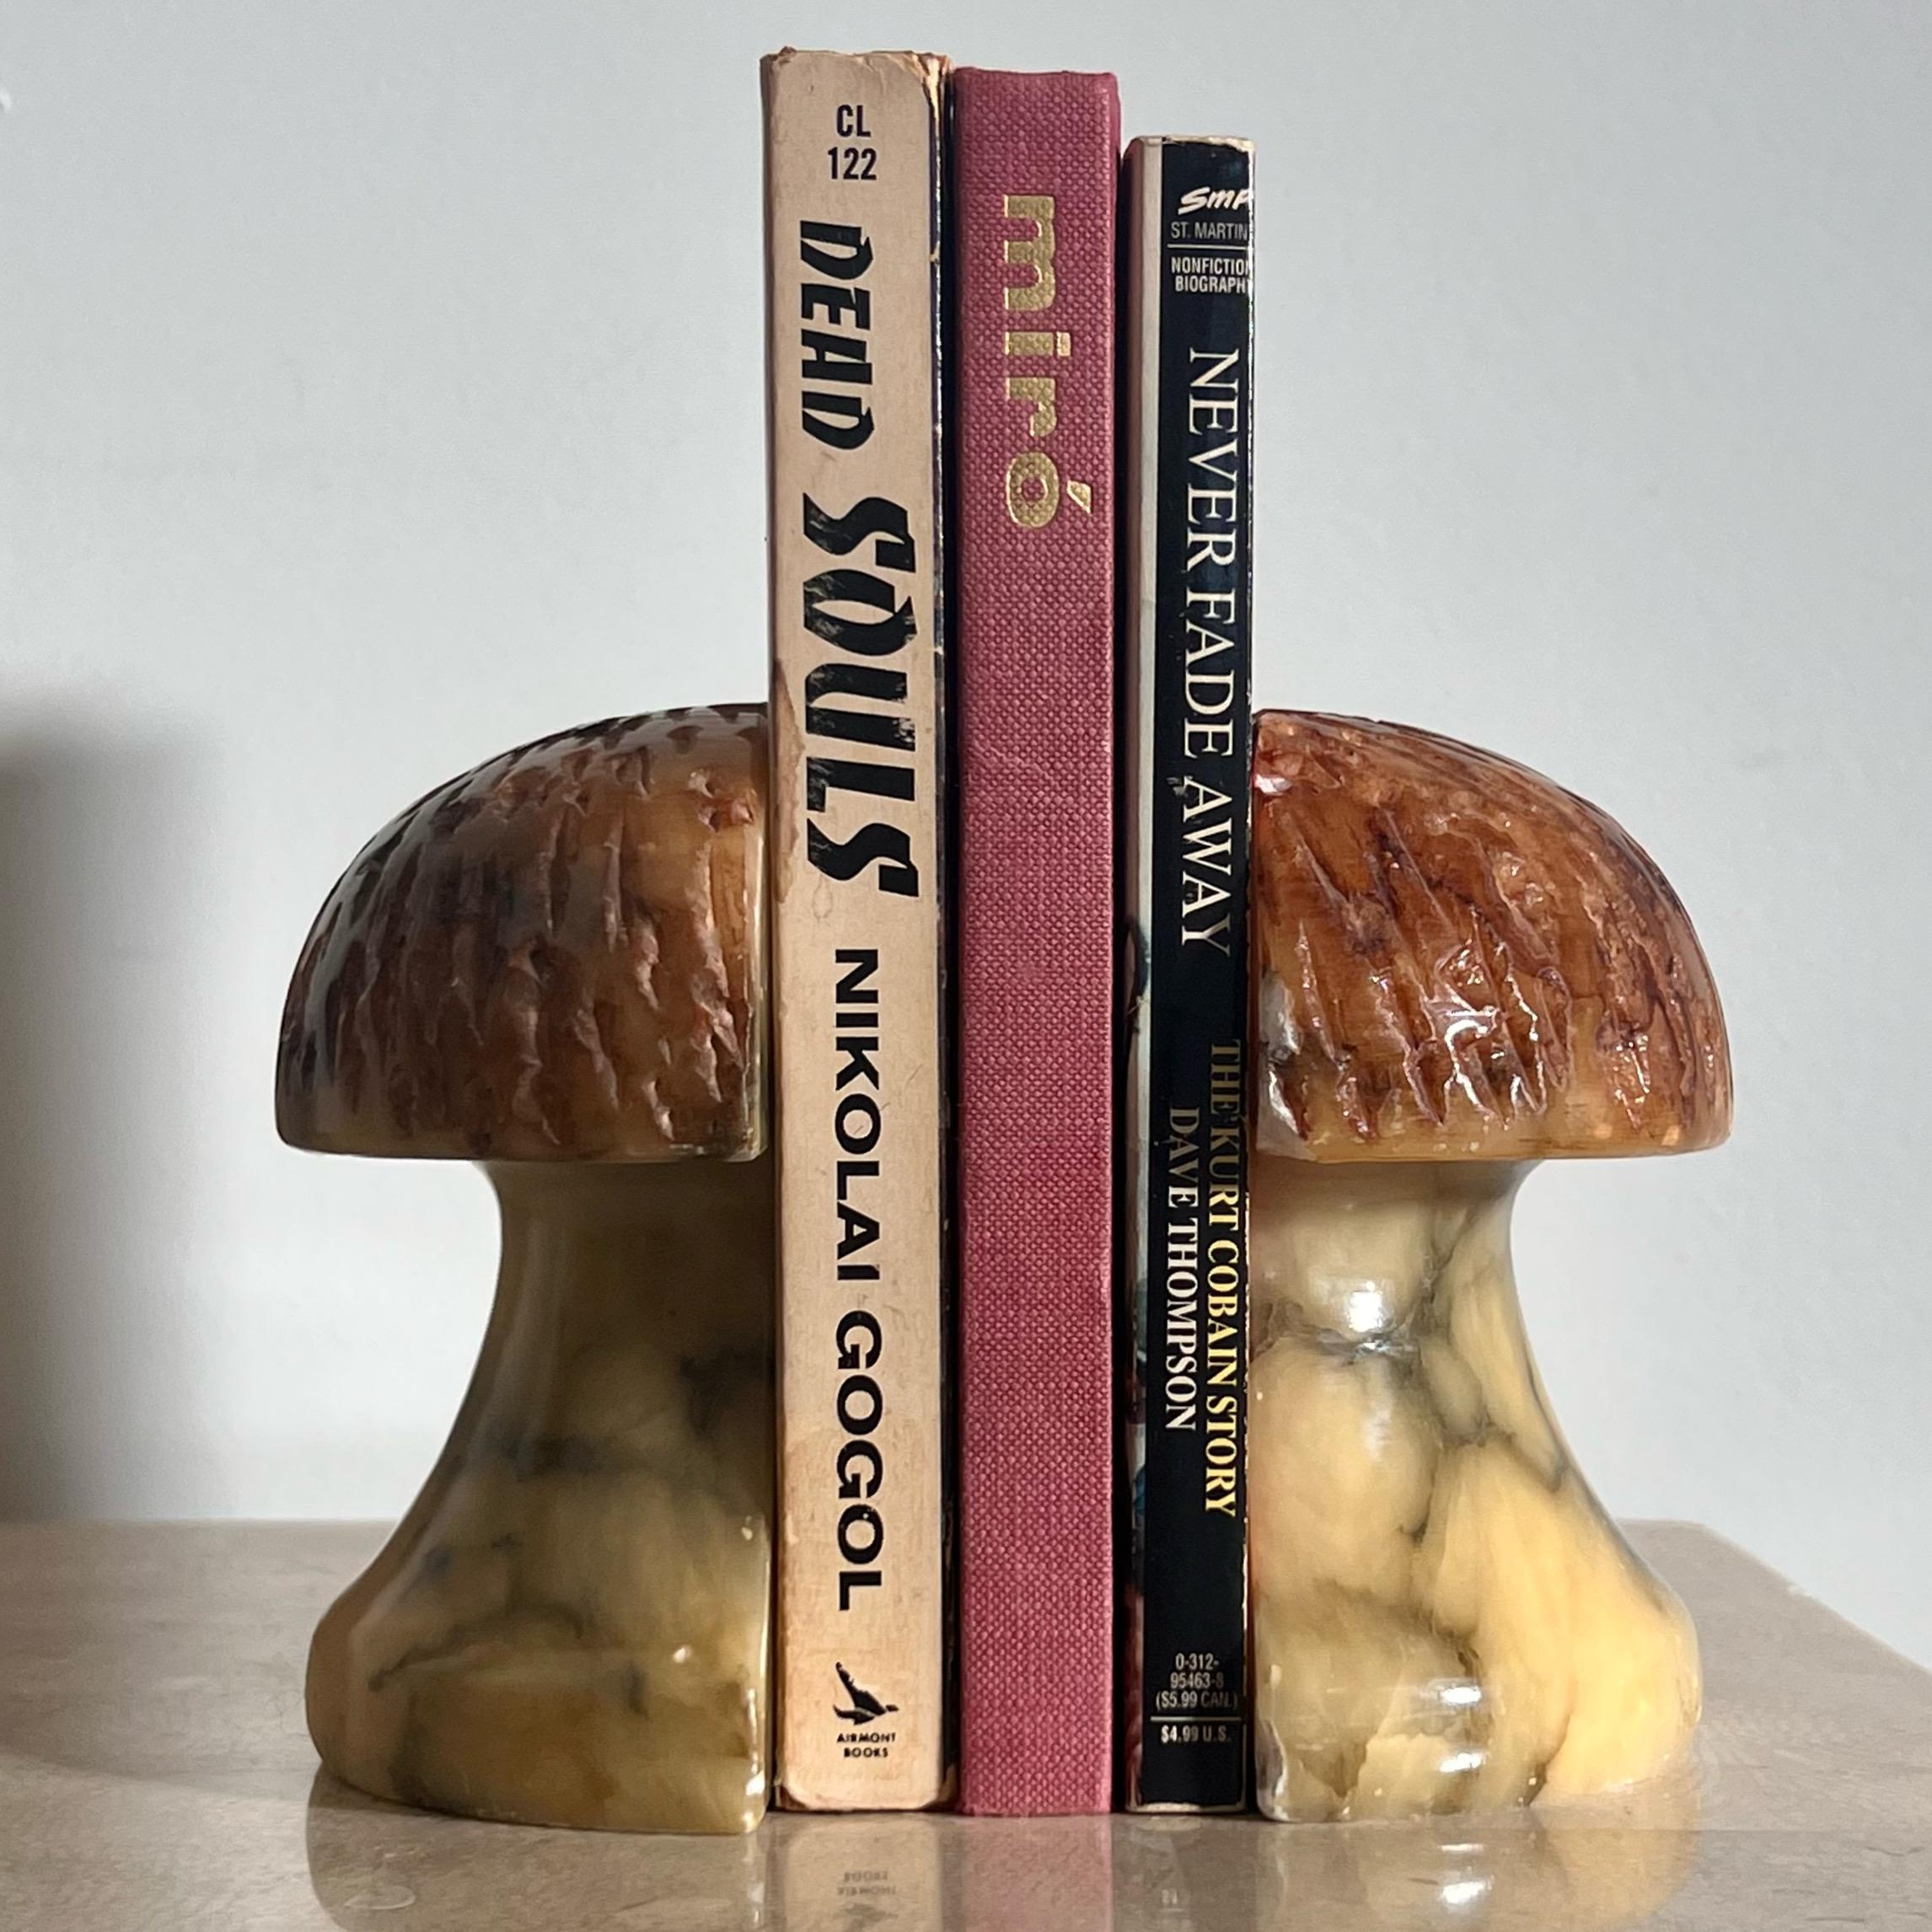 A pair of mid century modern vintage Italian alabaster marble bookends, hand-carved in the shape of mushrooms, circa 1960s. Bases are smooth and in tones of eggshell with charcoal veining, while tops are textured and of a chestnut colored hue. There